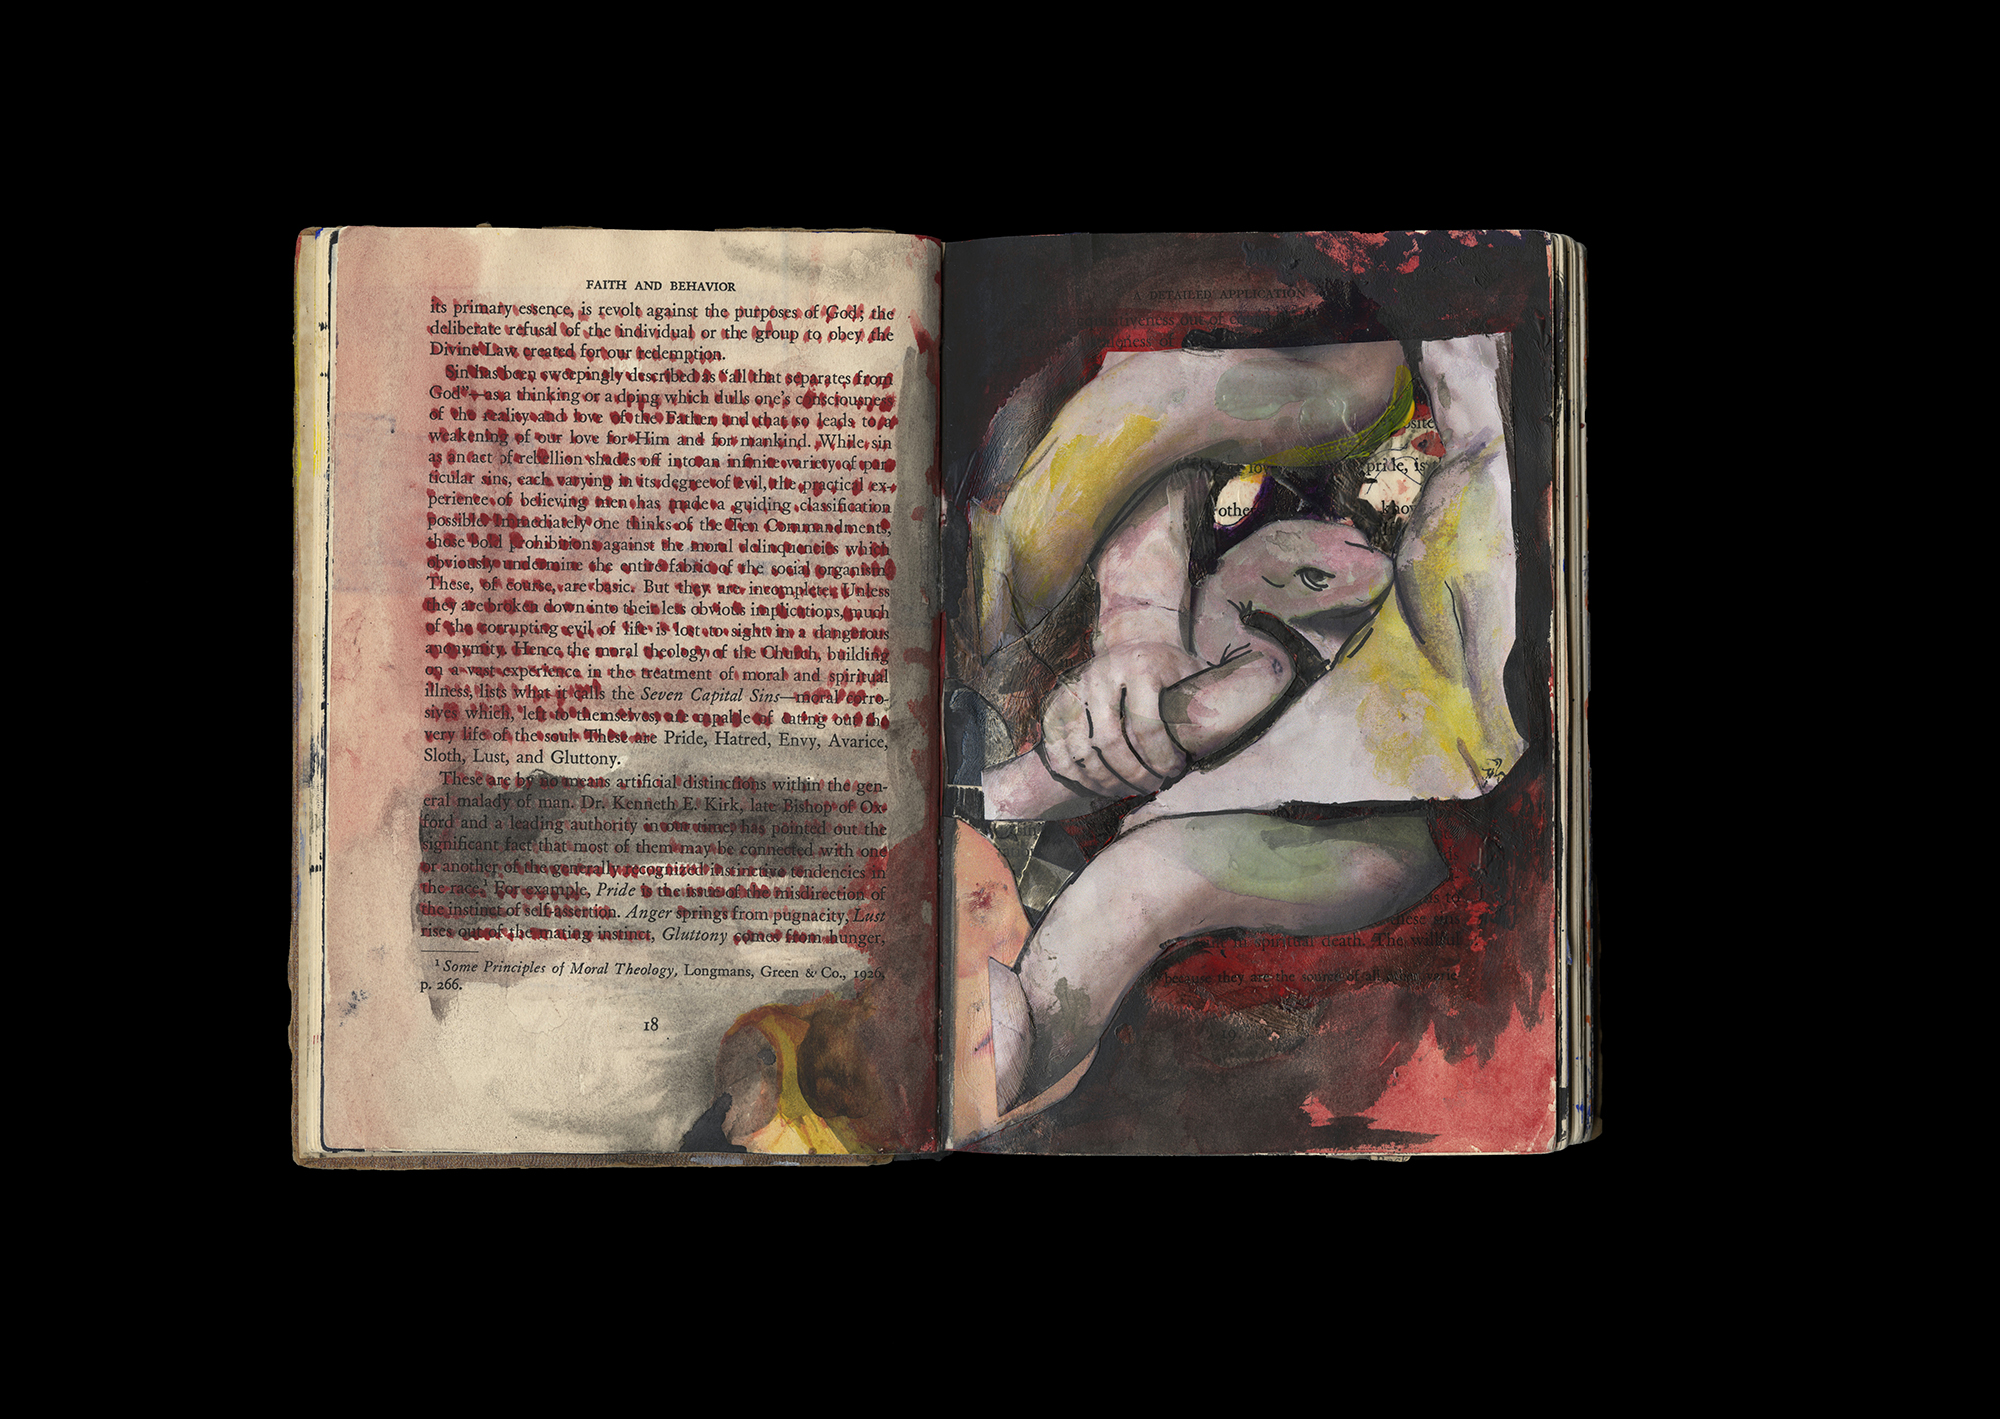  Noah Steinmann  Altered Book, Faith, and Behavior  Acrylic, watercolor, matte medium, ink, and found images from “The Grape” by Chad Walsh and Eric Montizambert  8.5” x 11’’  2018 